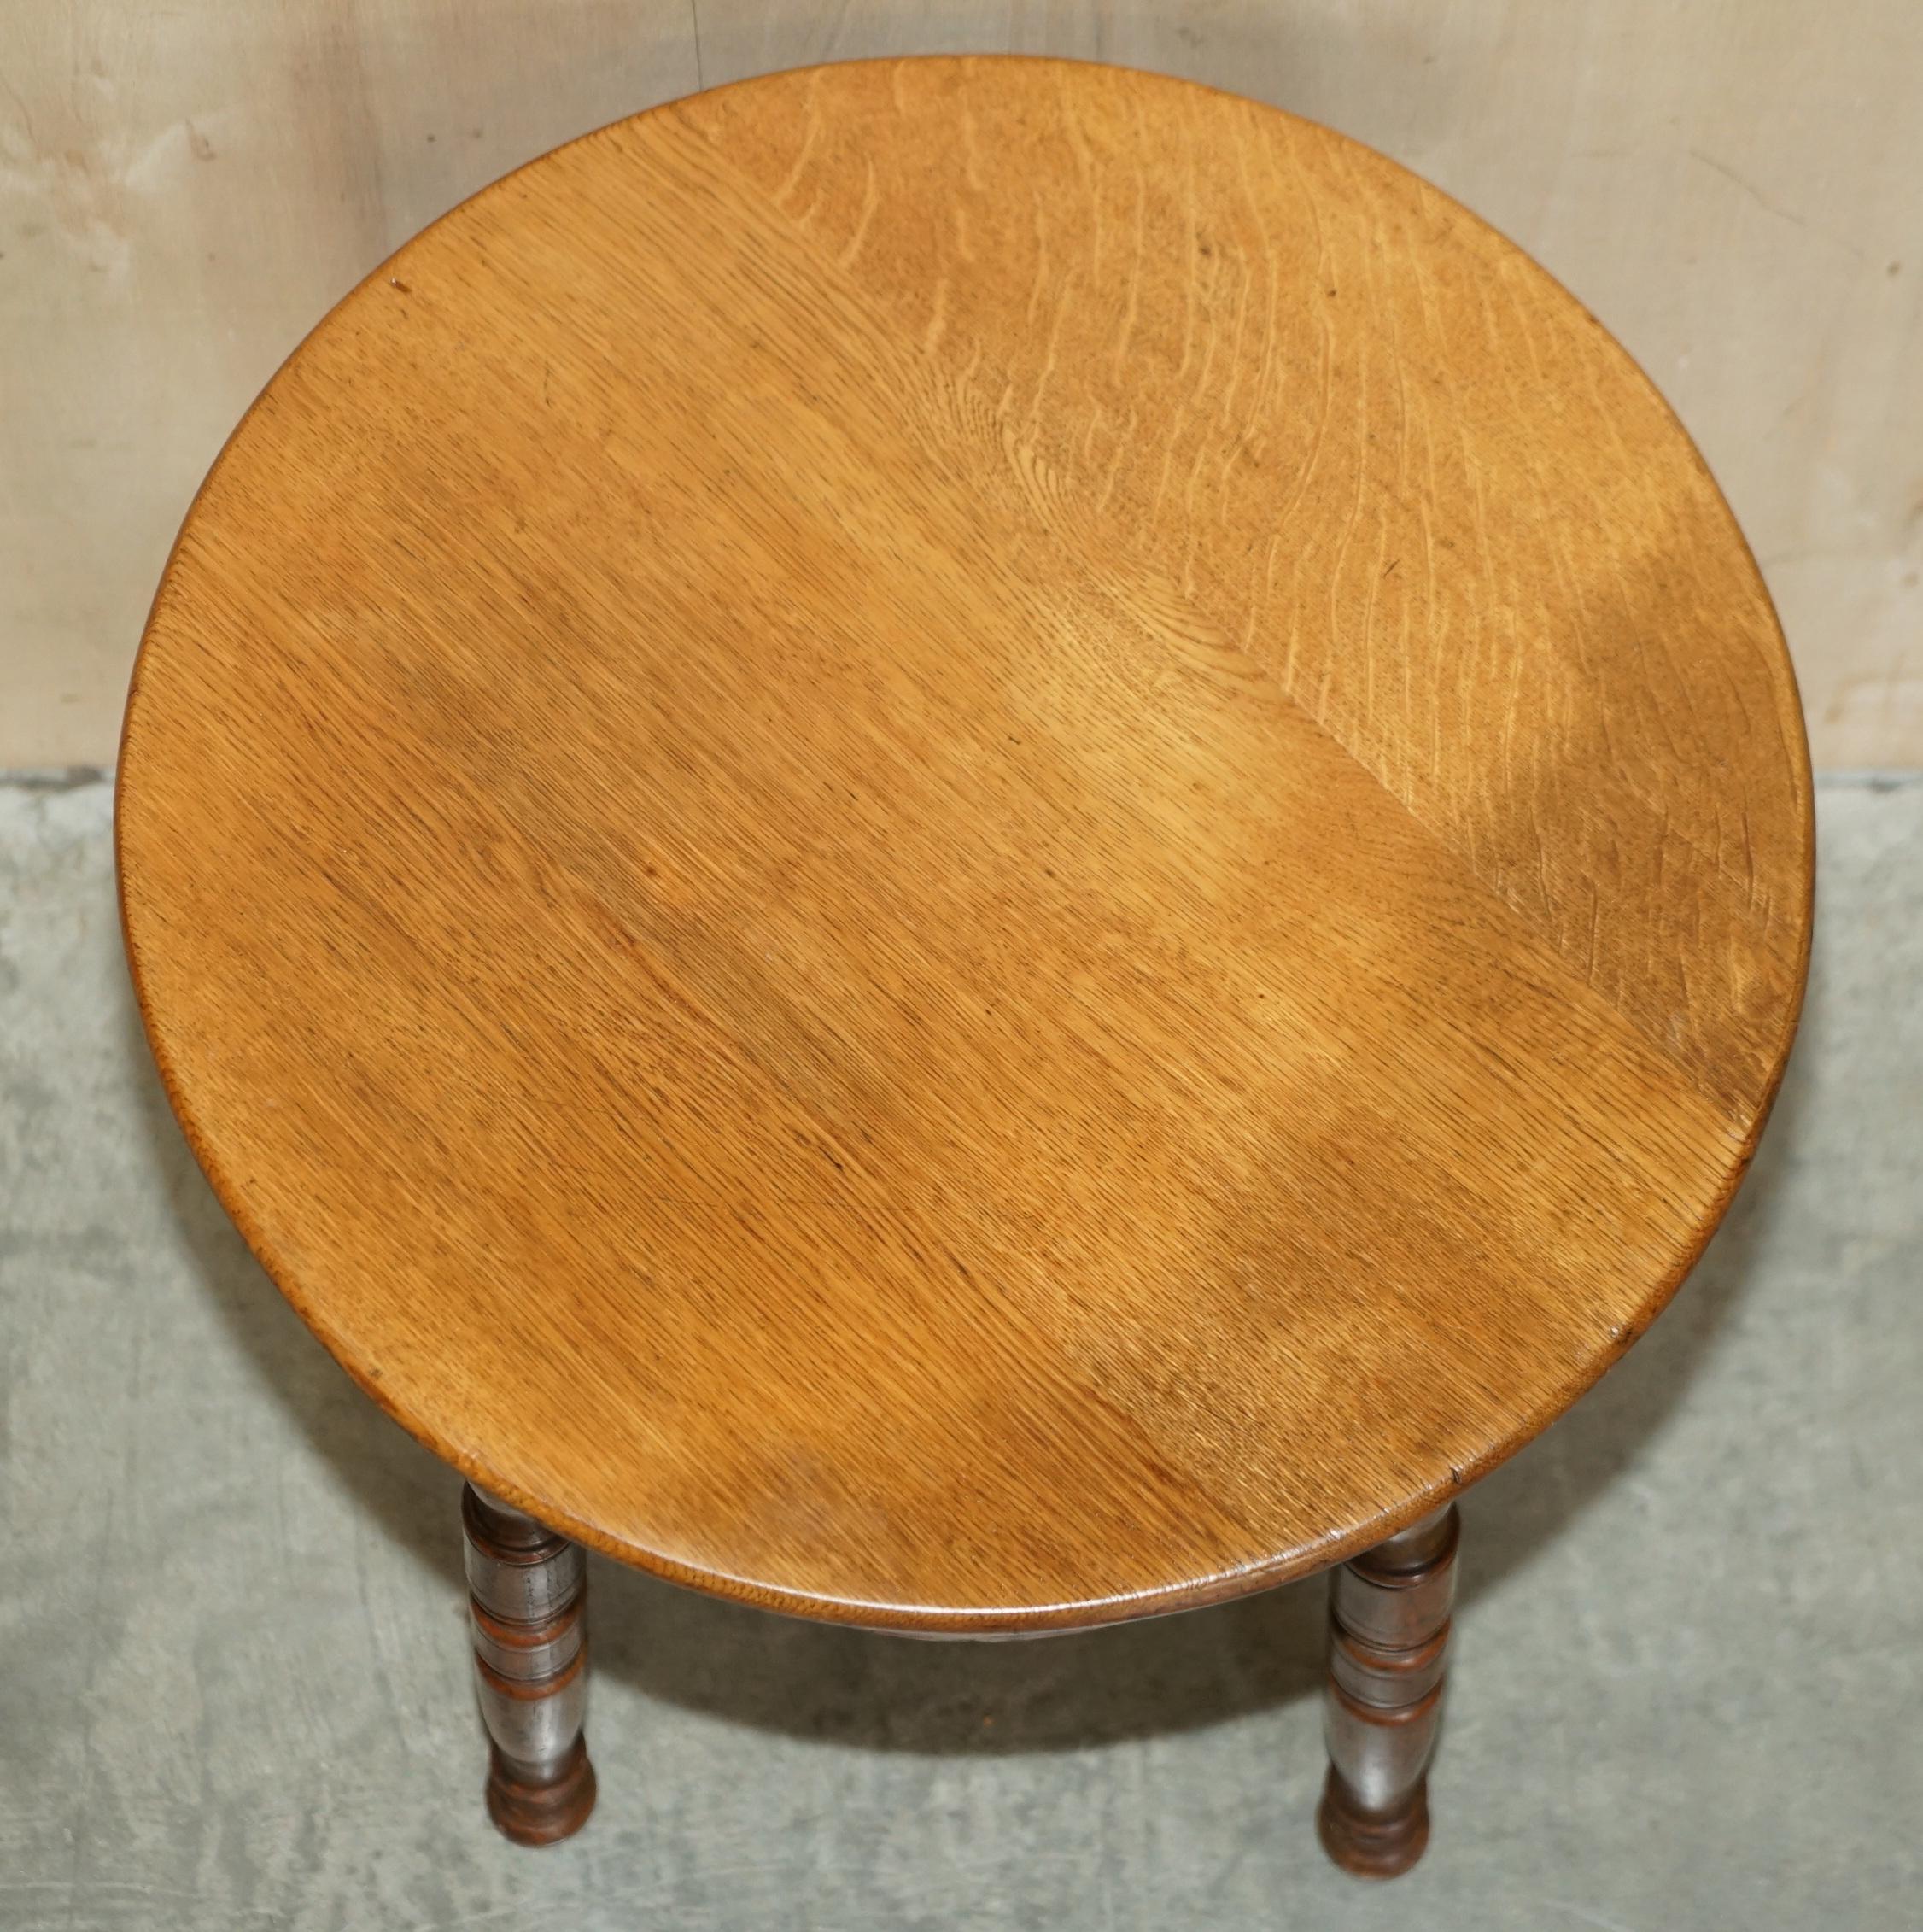 Lovely circa 1900 English Oak Side Table with Turned Legs and a Nice Rich Patina For Sale 2